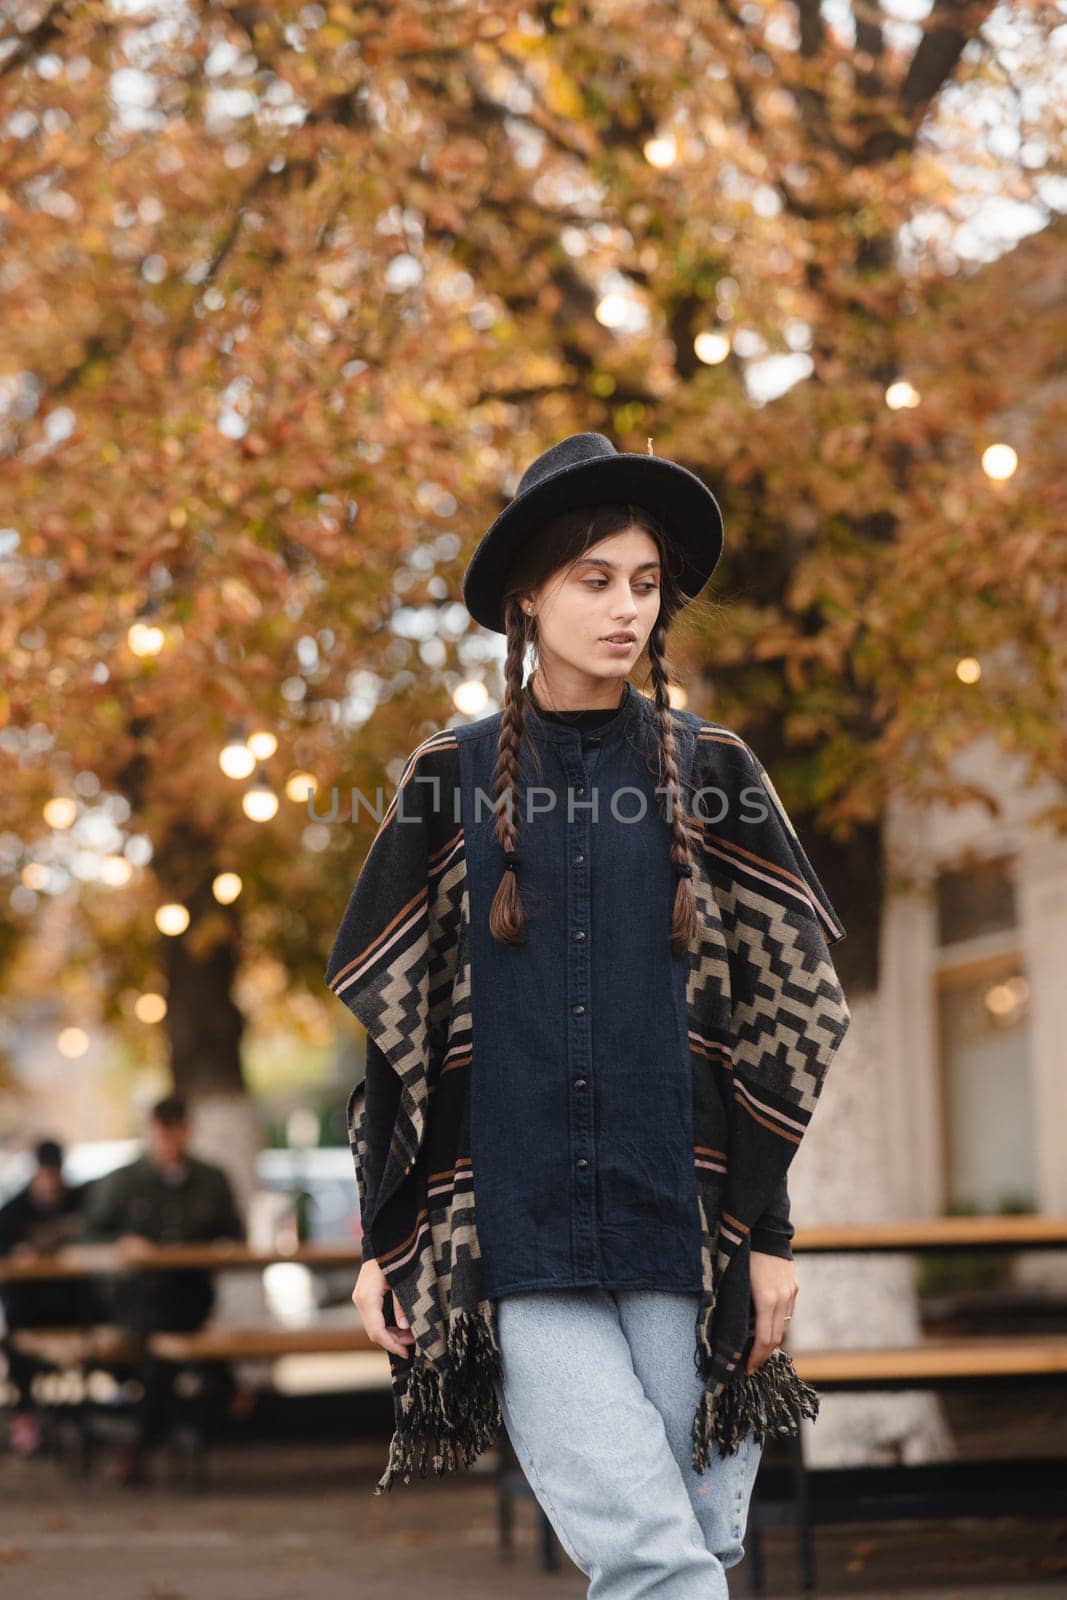 A captivating girl, with bohemian flair, accents her look with a black hat in the fall cityscape. High quality photo